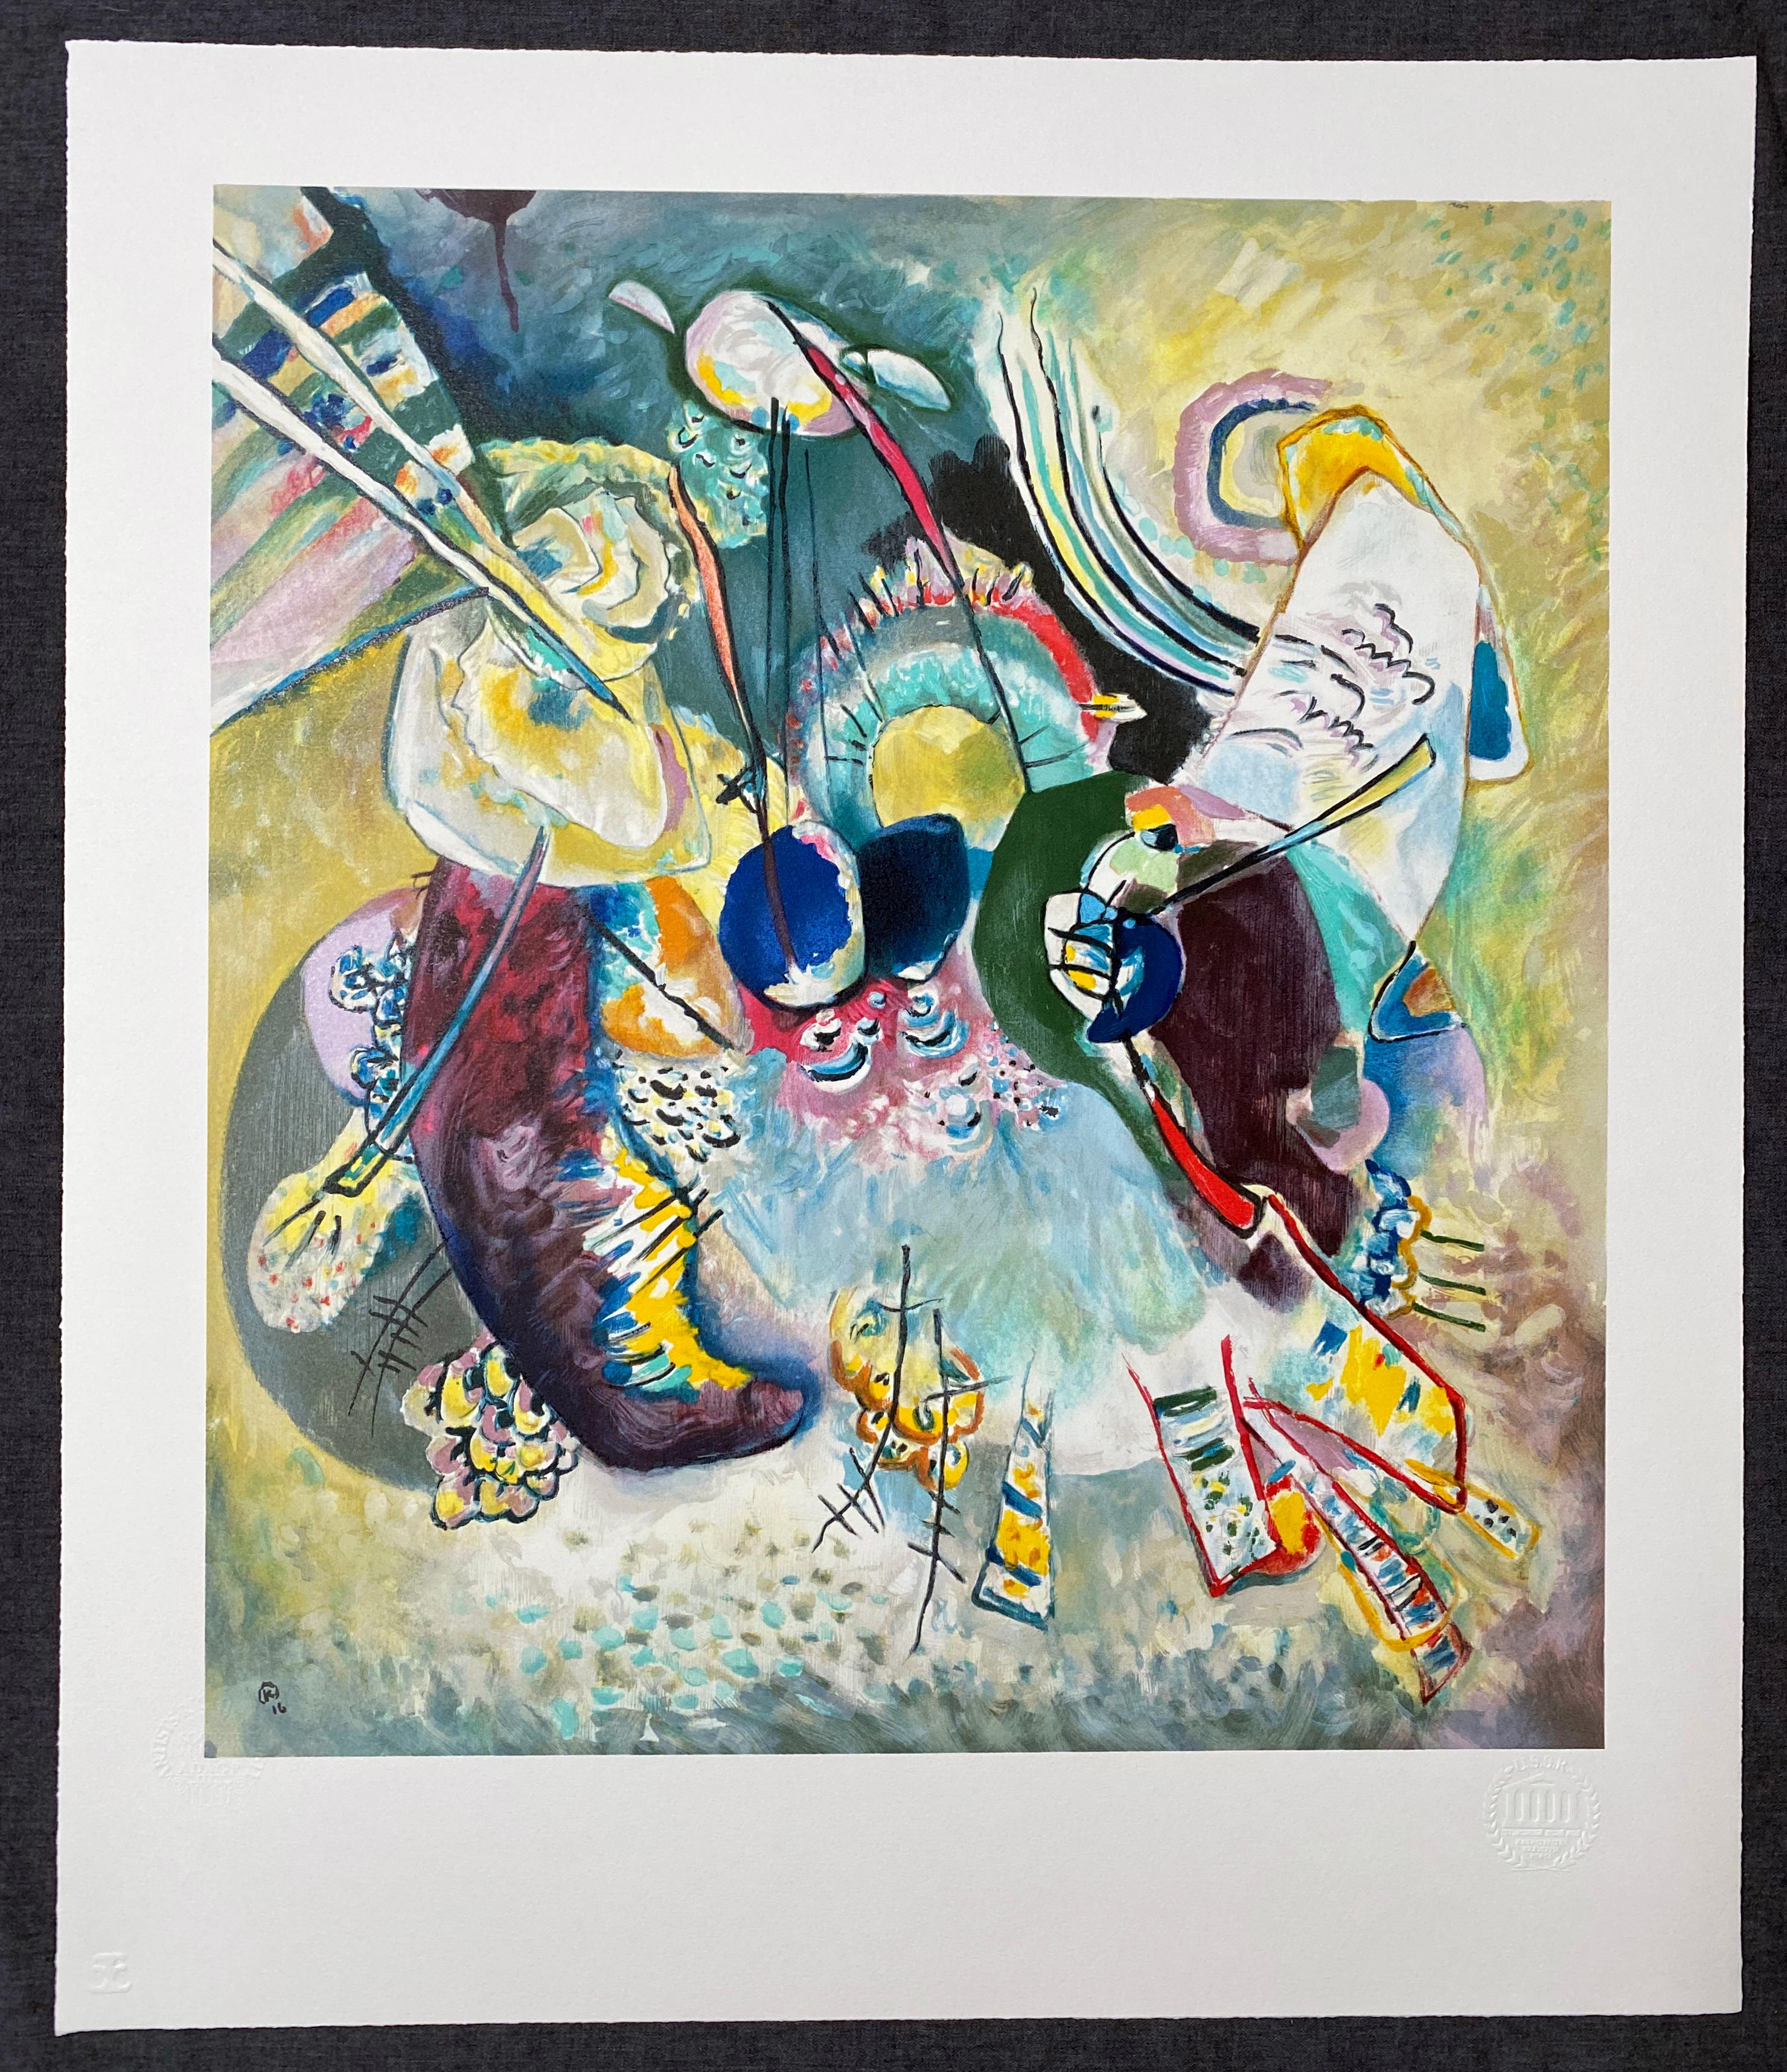 Composition 1916 - Print by (after) Wassily Kandinsky